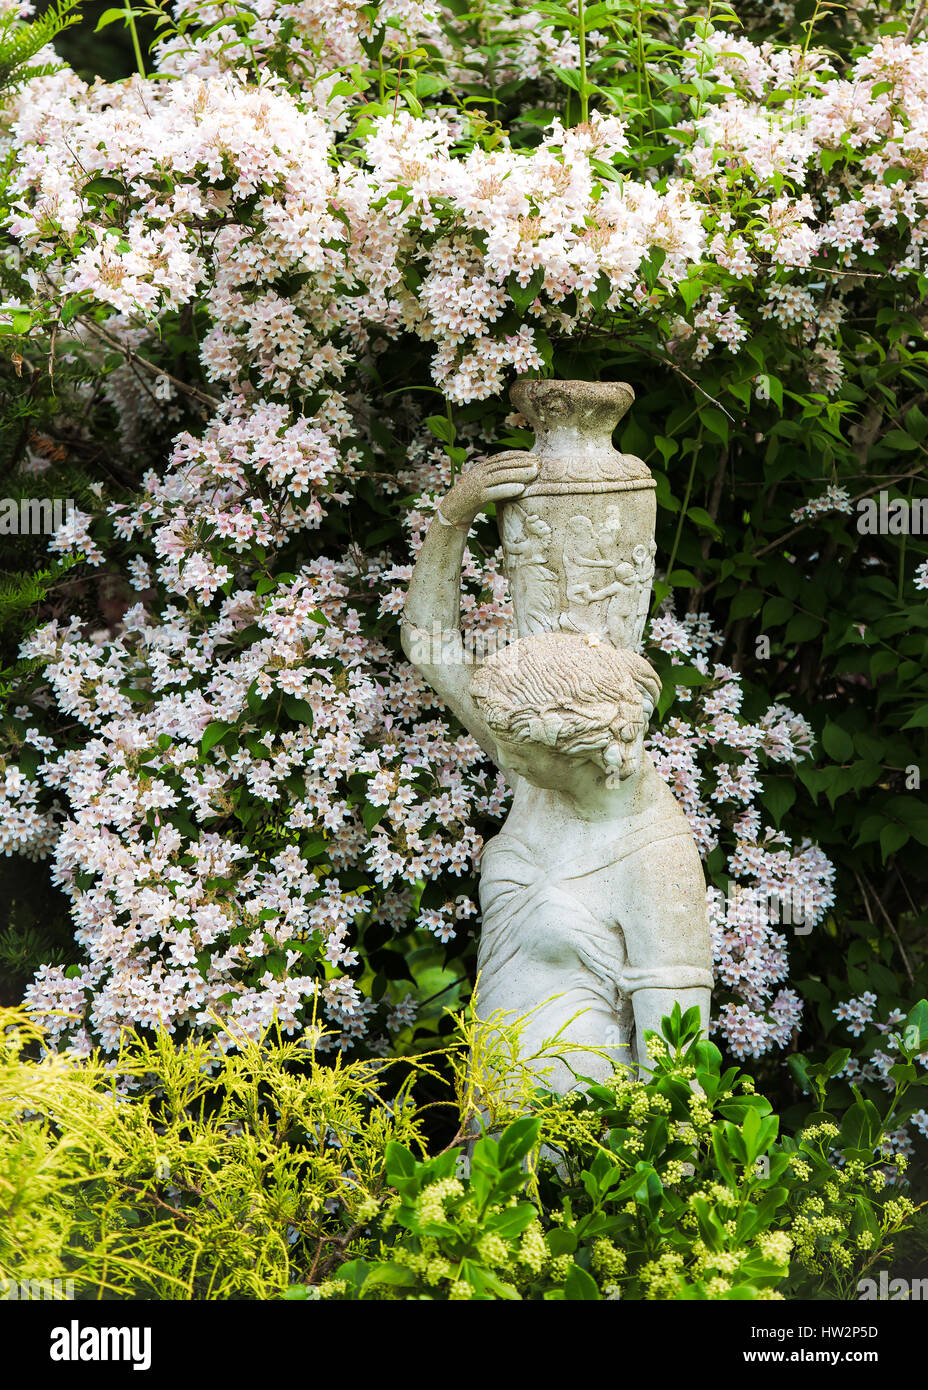 Garden statue constructed out of cement, amongst the flowers of a beauty bush. Stock Photo